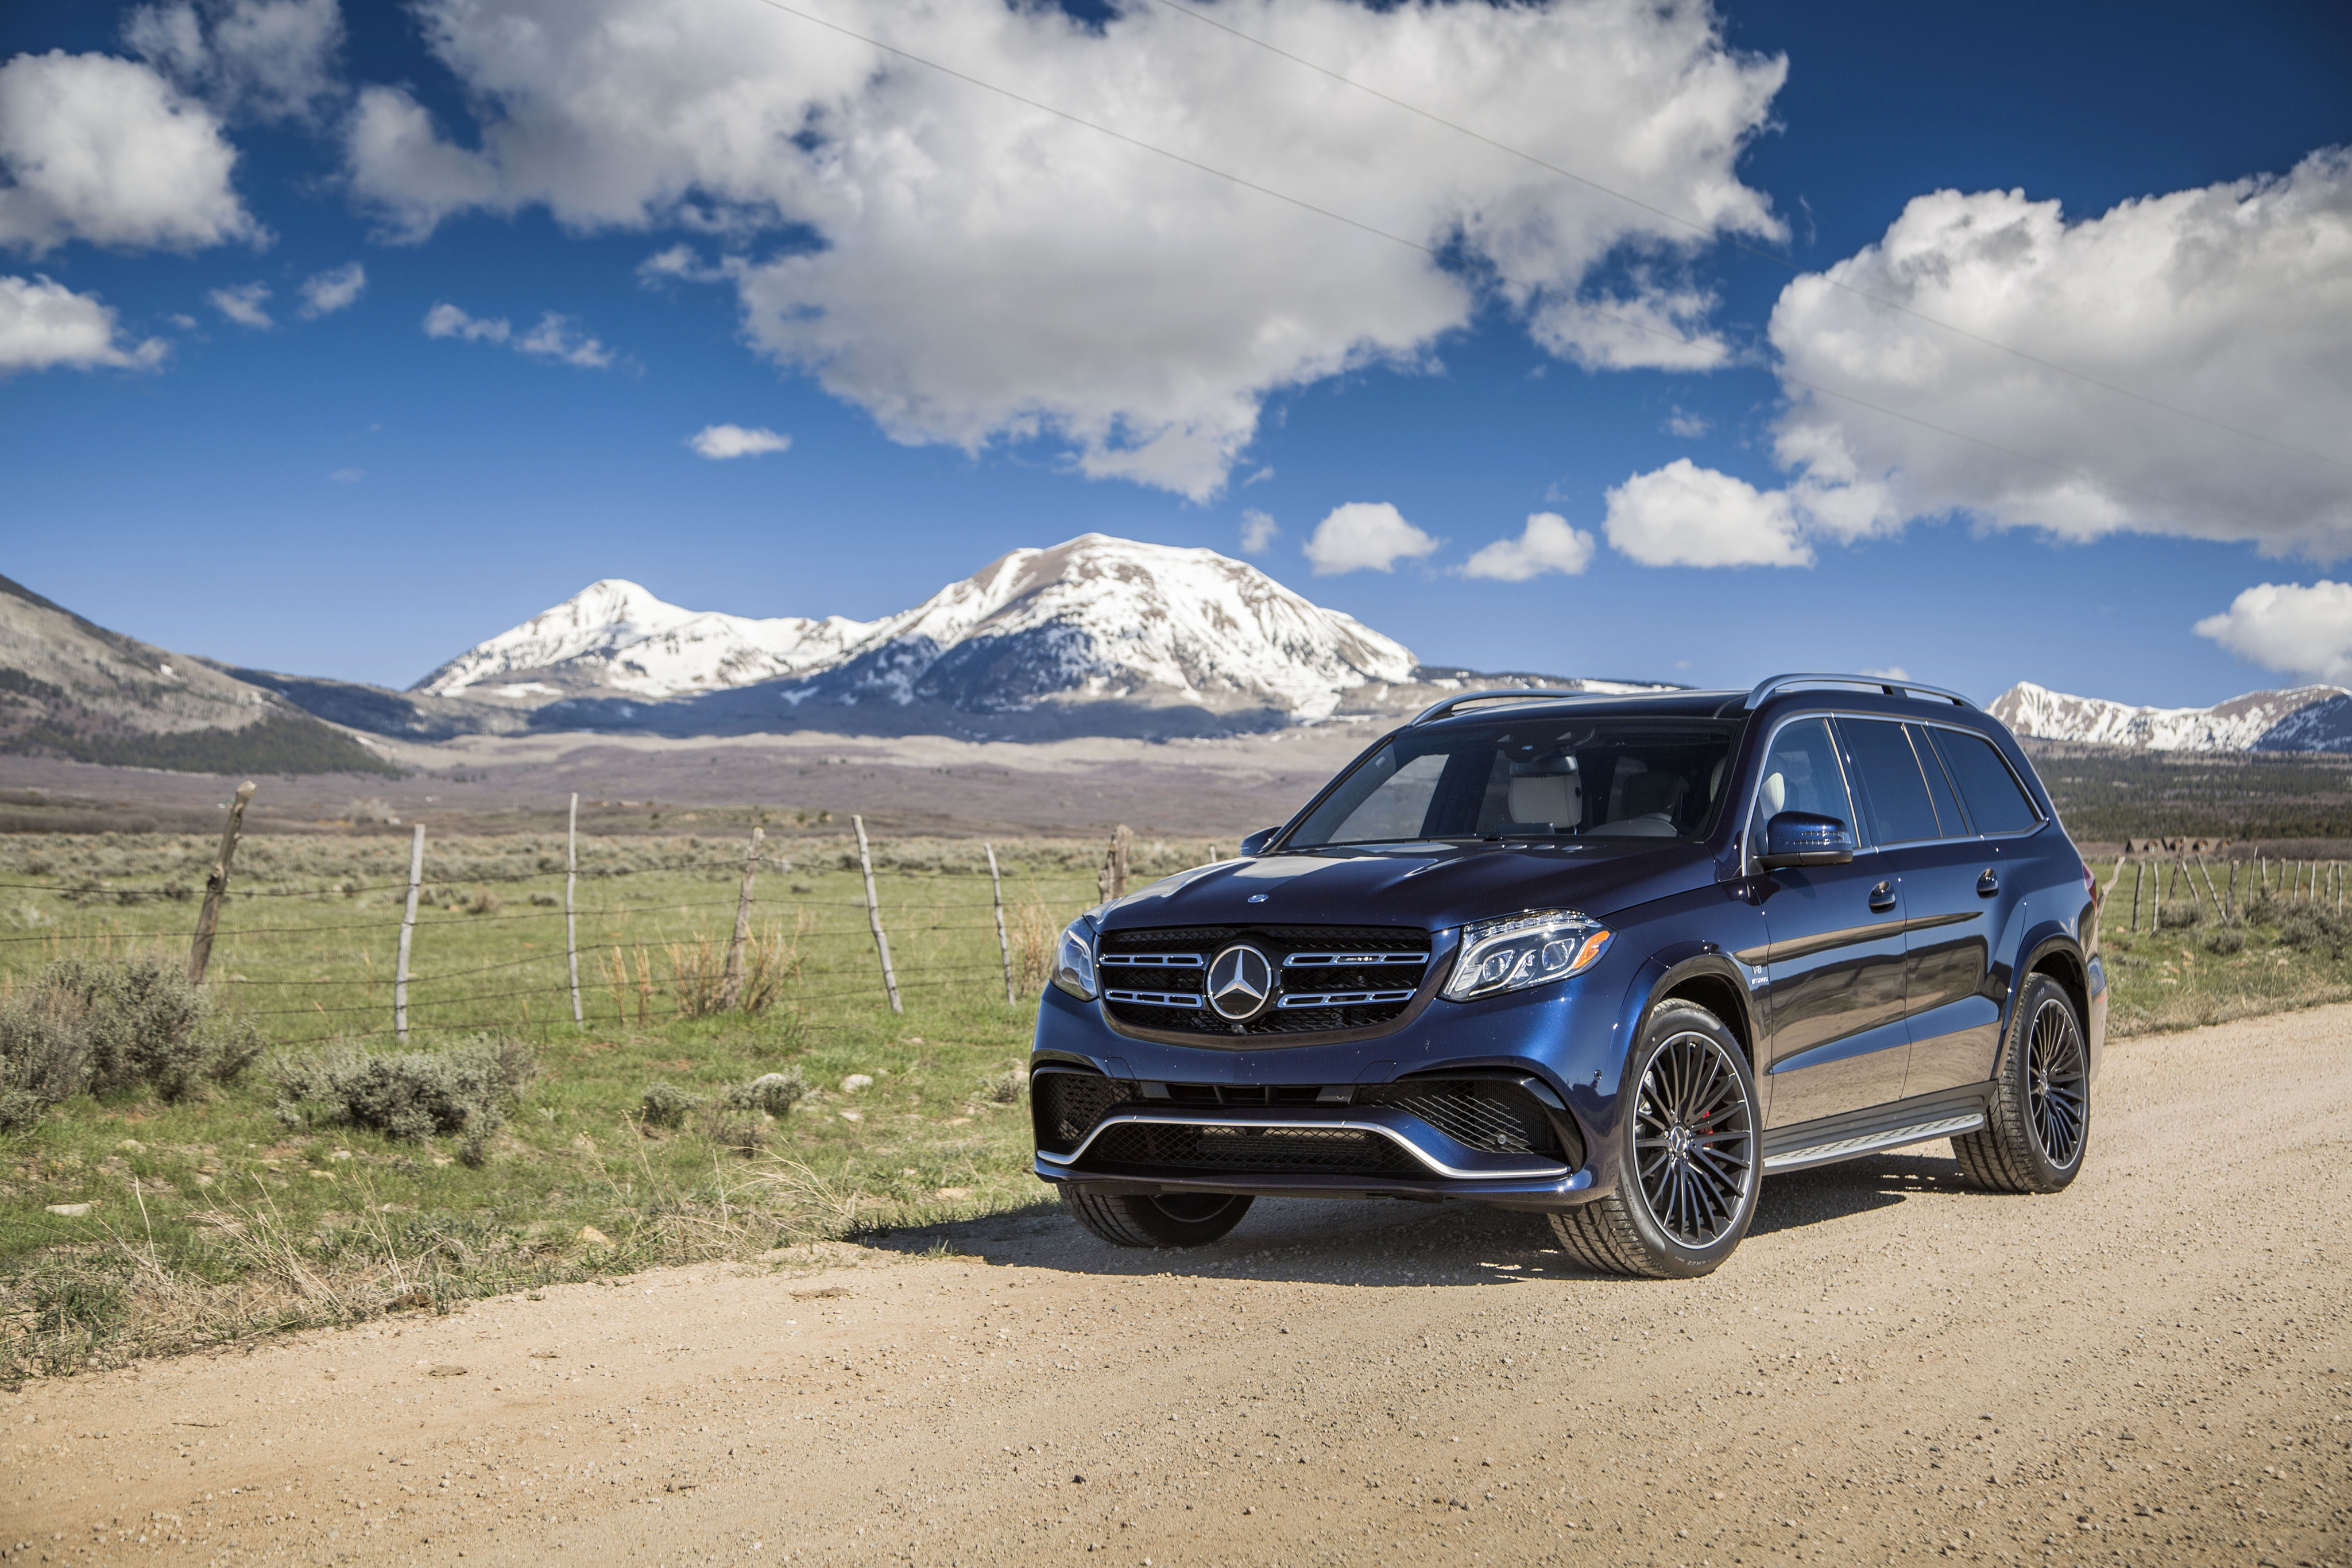 Black Mercedes Benz Gl Class On The Background Of